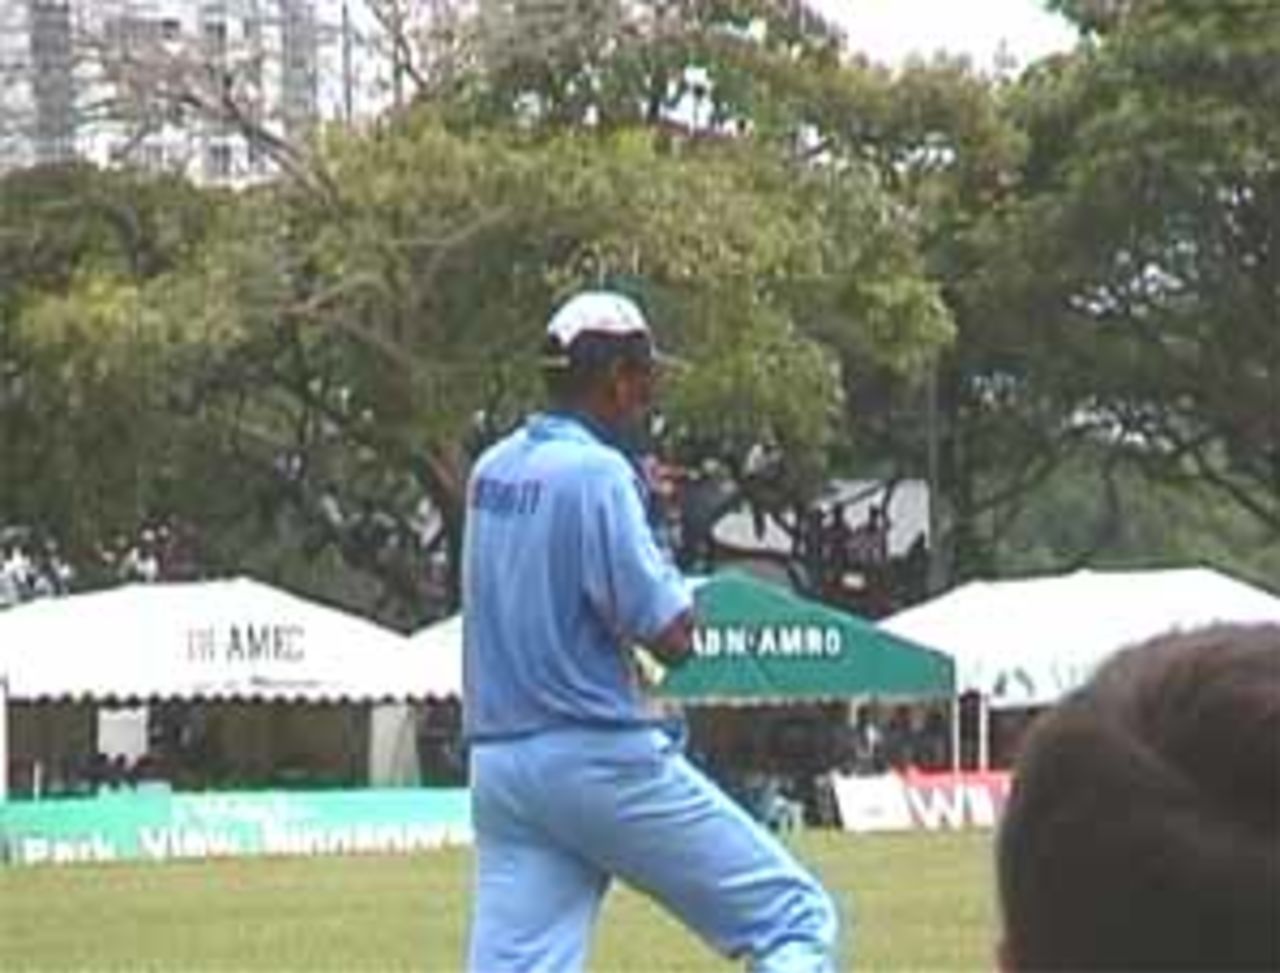 Mohanty taking the catch of McLean, India v West Indies (3rd ODI), Coca-Cola Singapore Challenge, 1999-2000, Kallang Ground, Singapore, 5 Sep 1999.